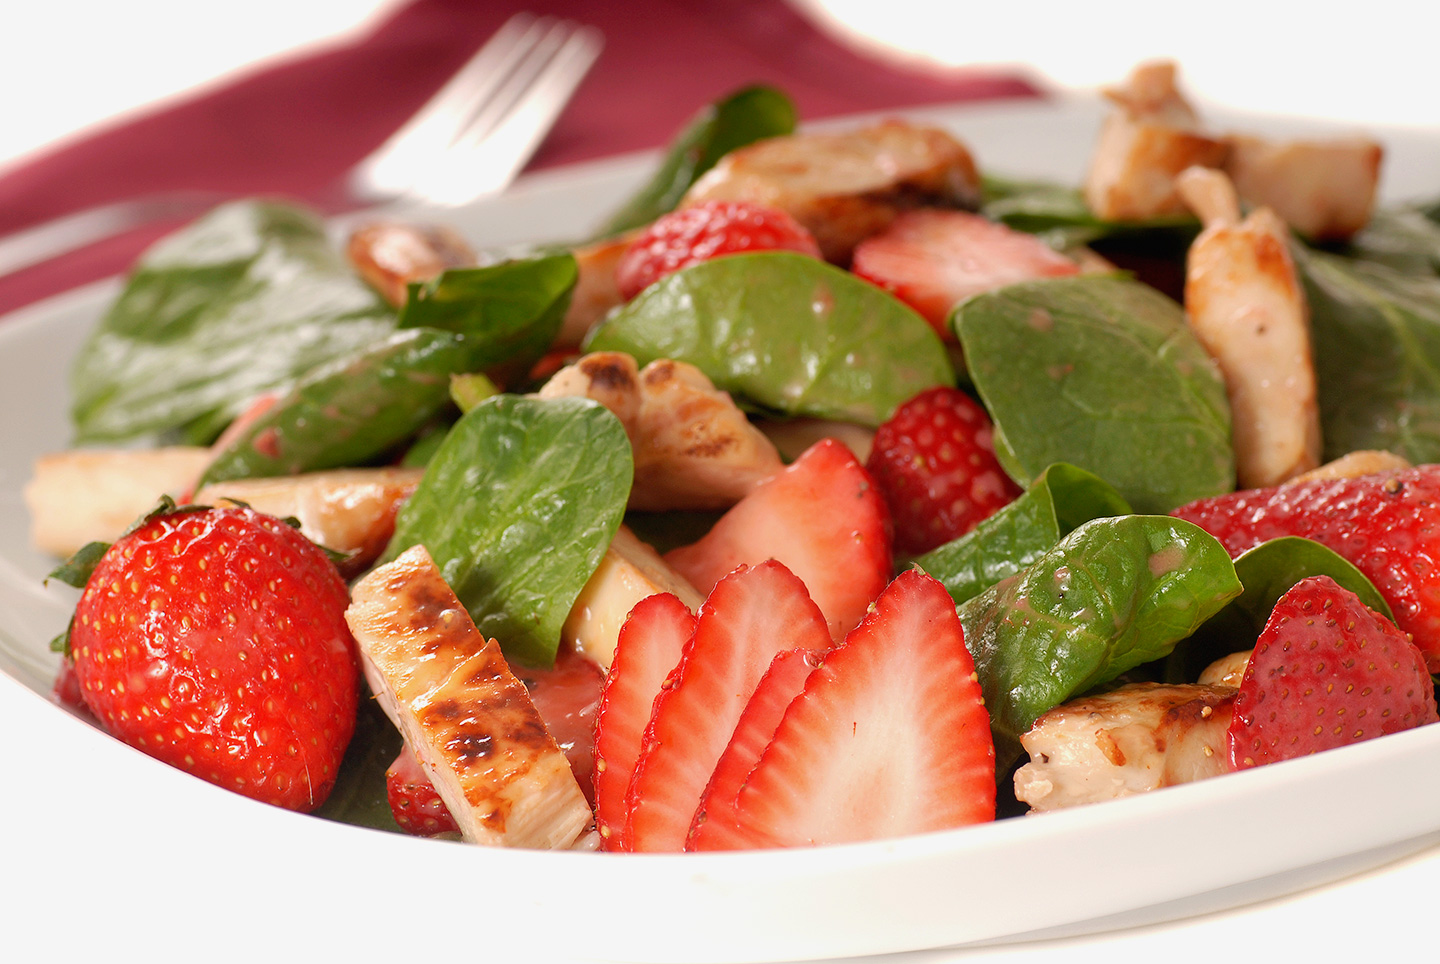 Strawberries, Grilled Chicken and Spinach Salad with Citrus Dressing